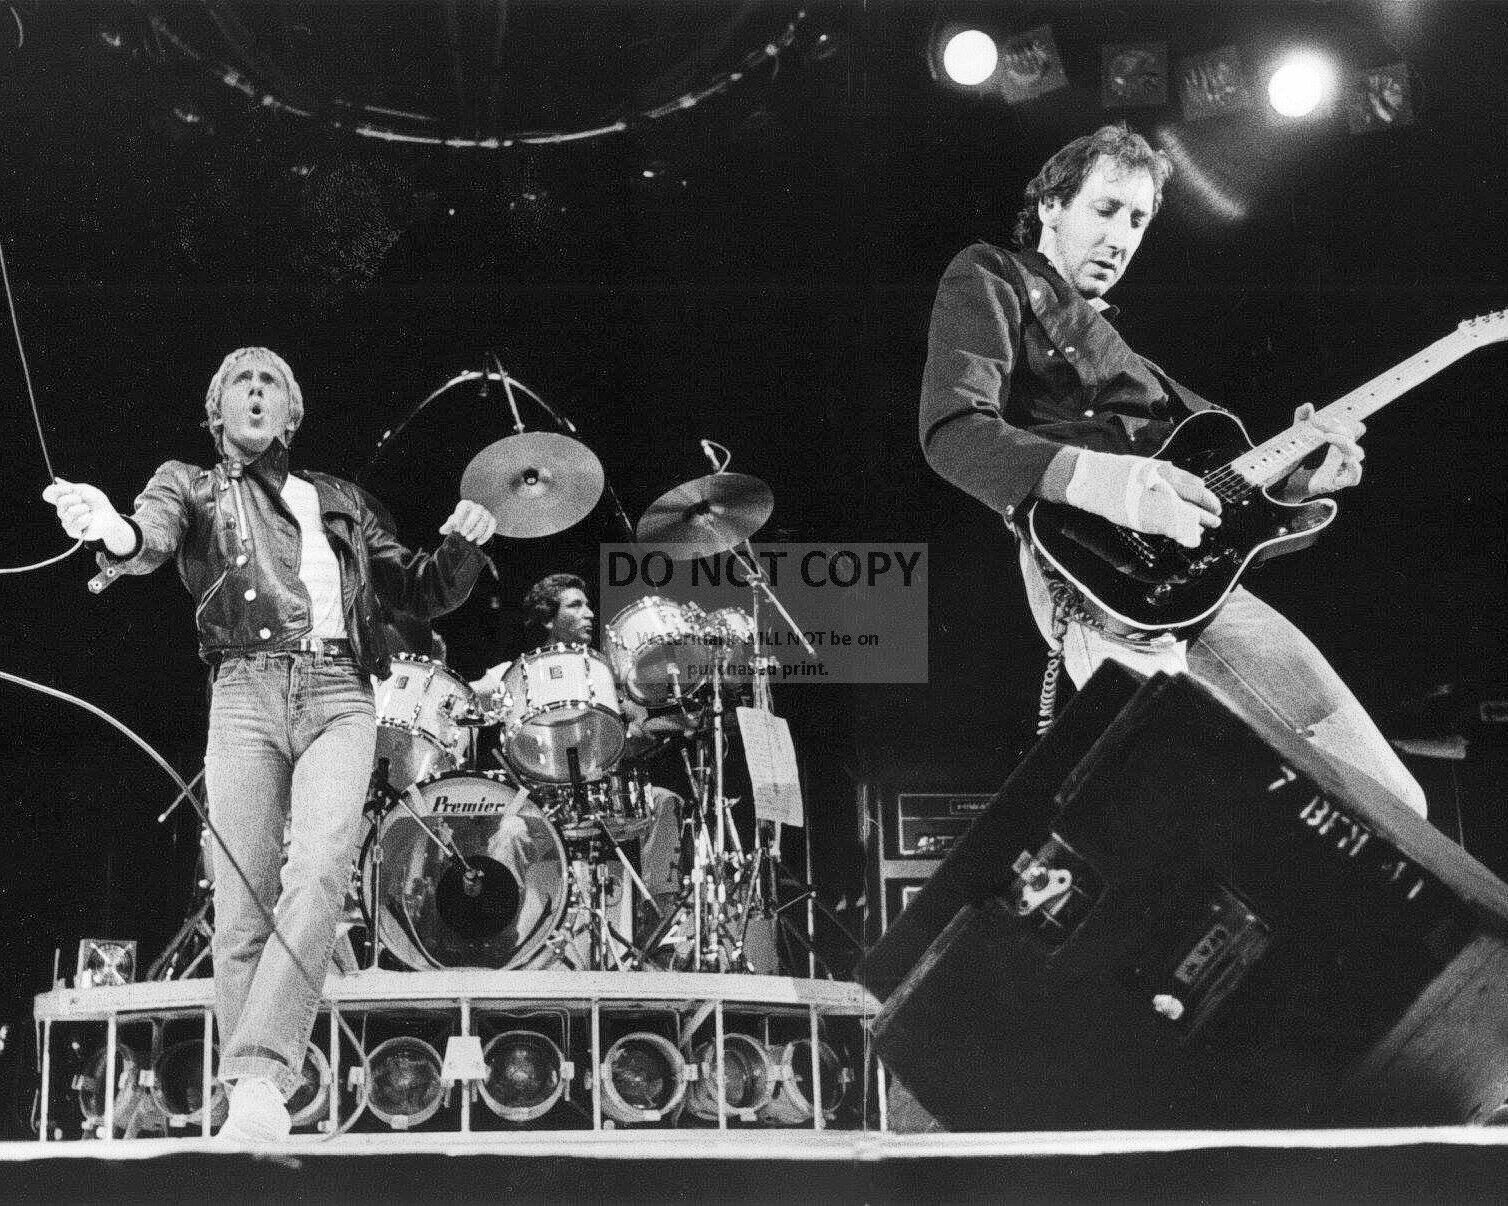 ROGER DALTREY AND PETE TOWNSHEND IN THE ROCK BAND 